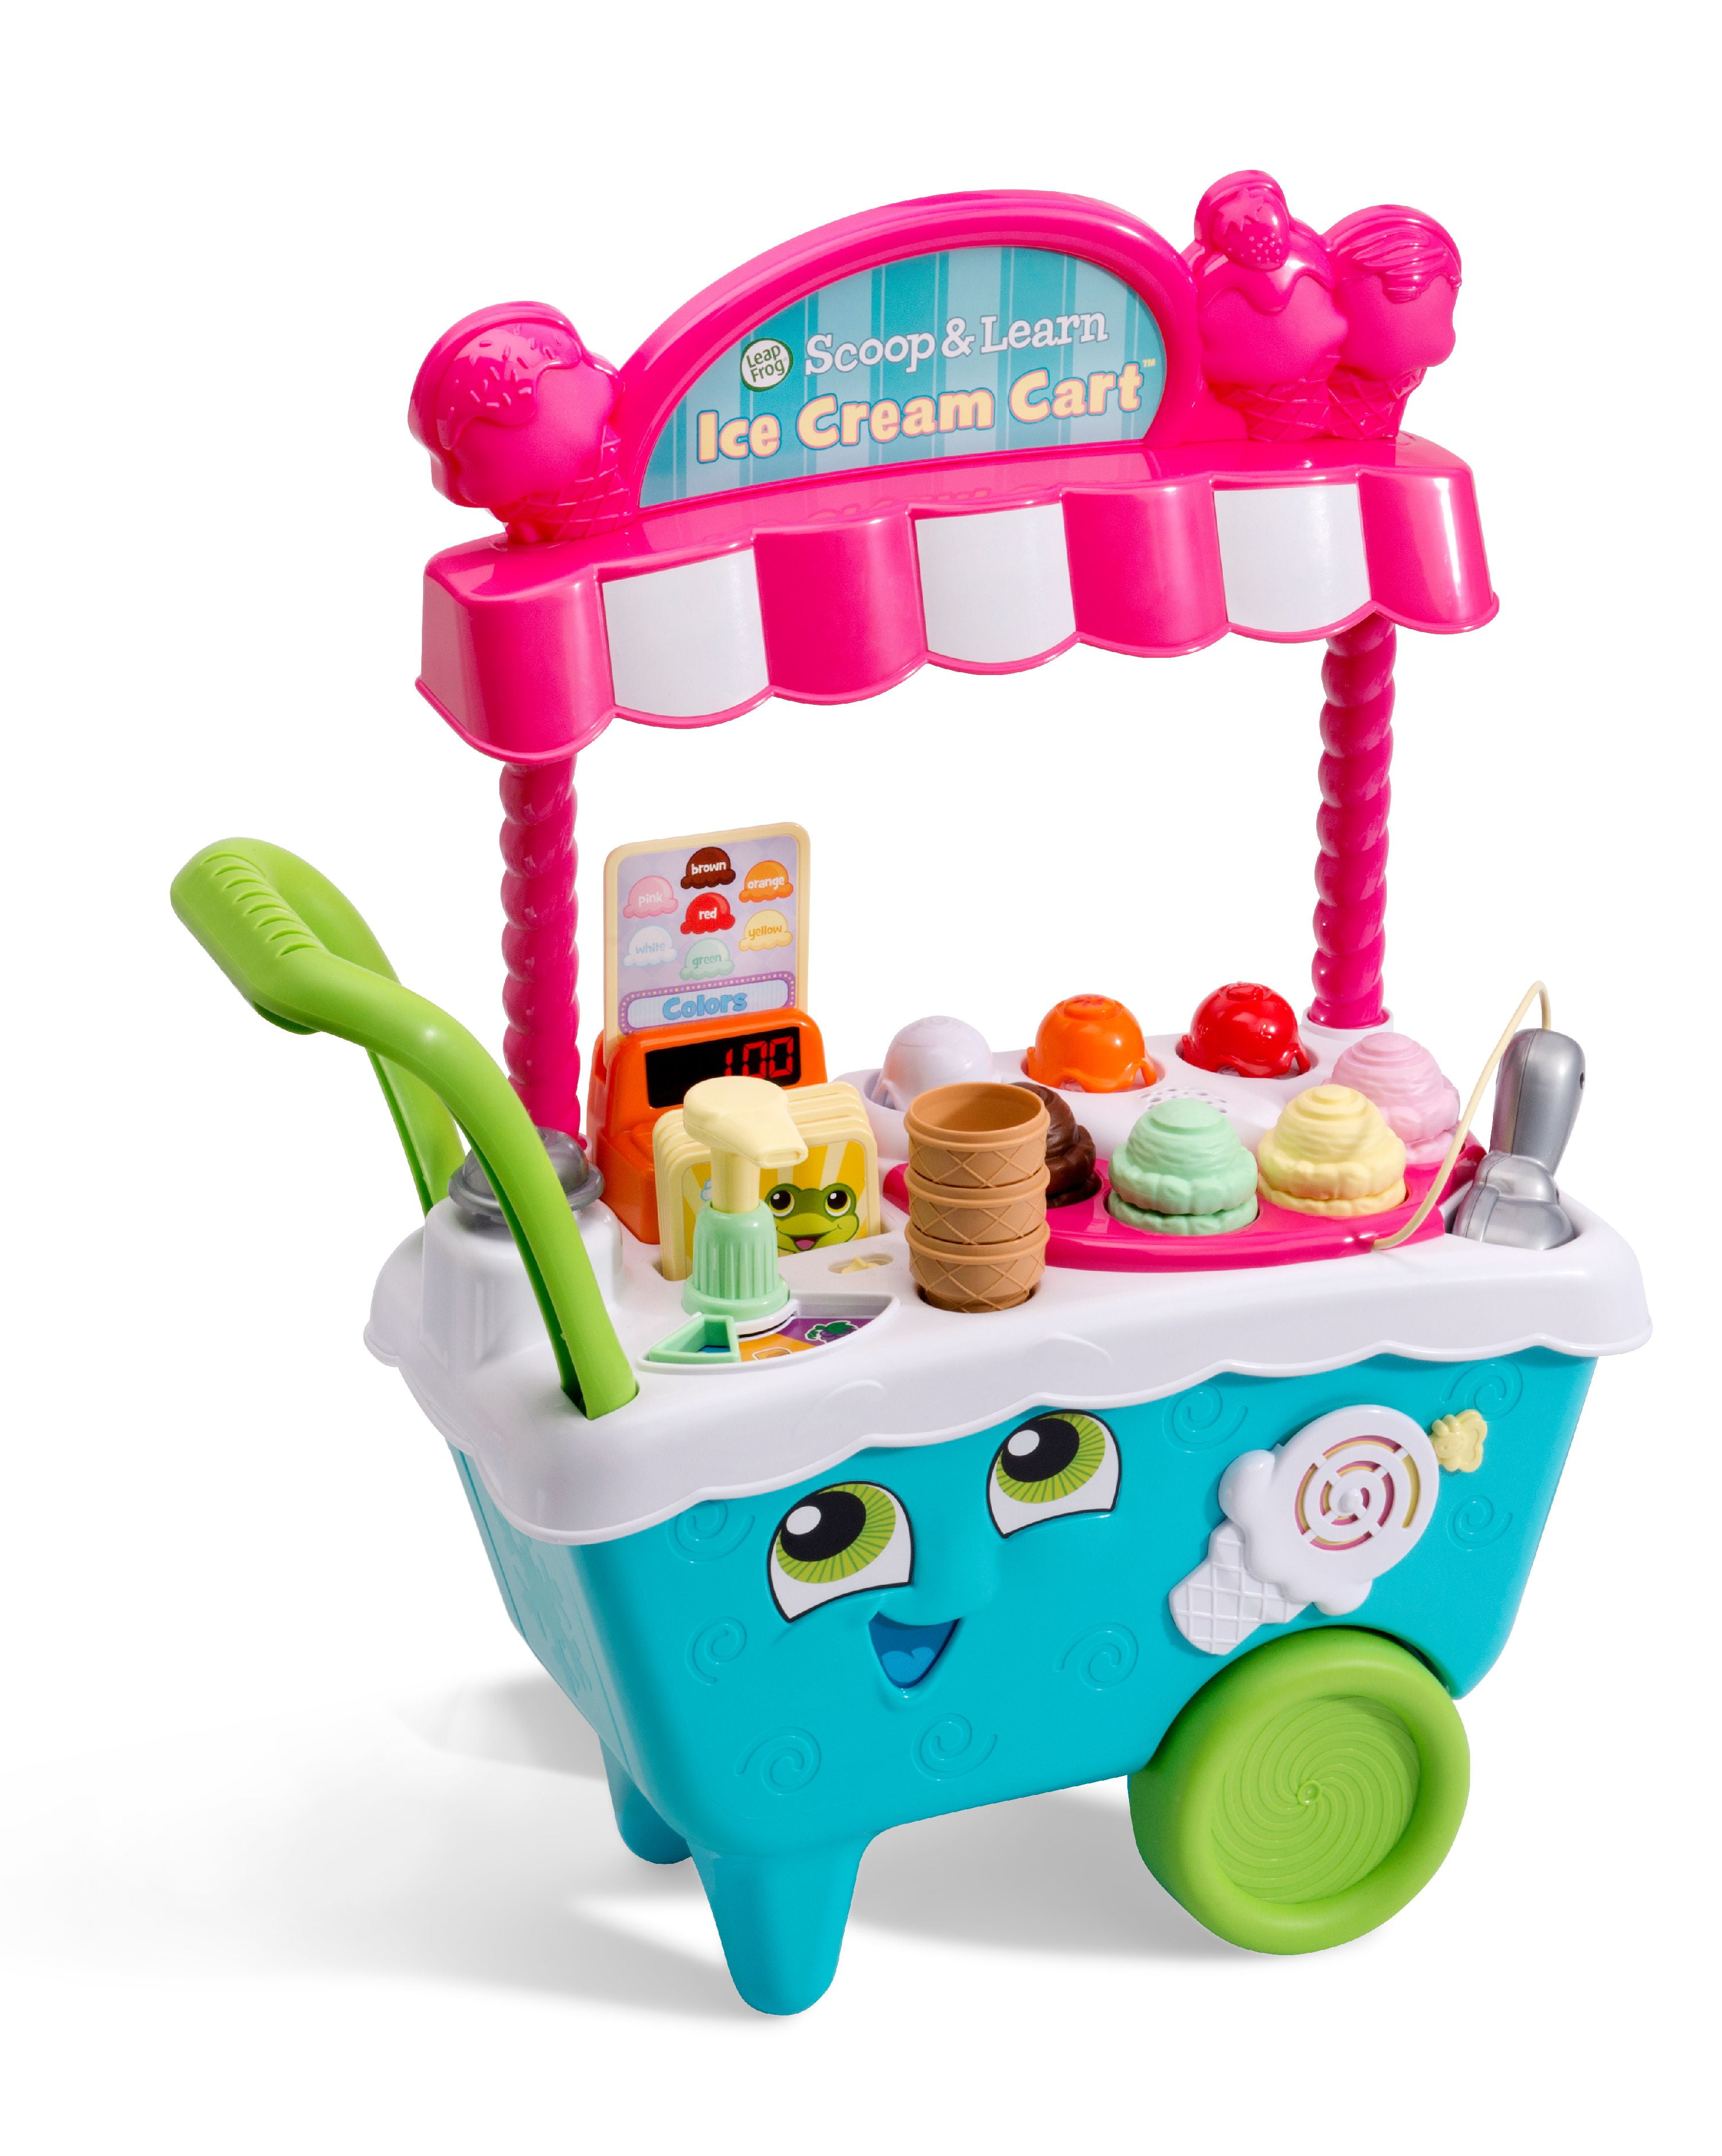 LeapFrog Scoop and Learn Ice Cream Cart 